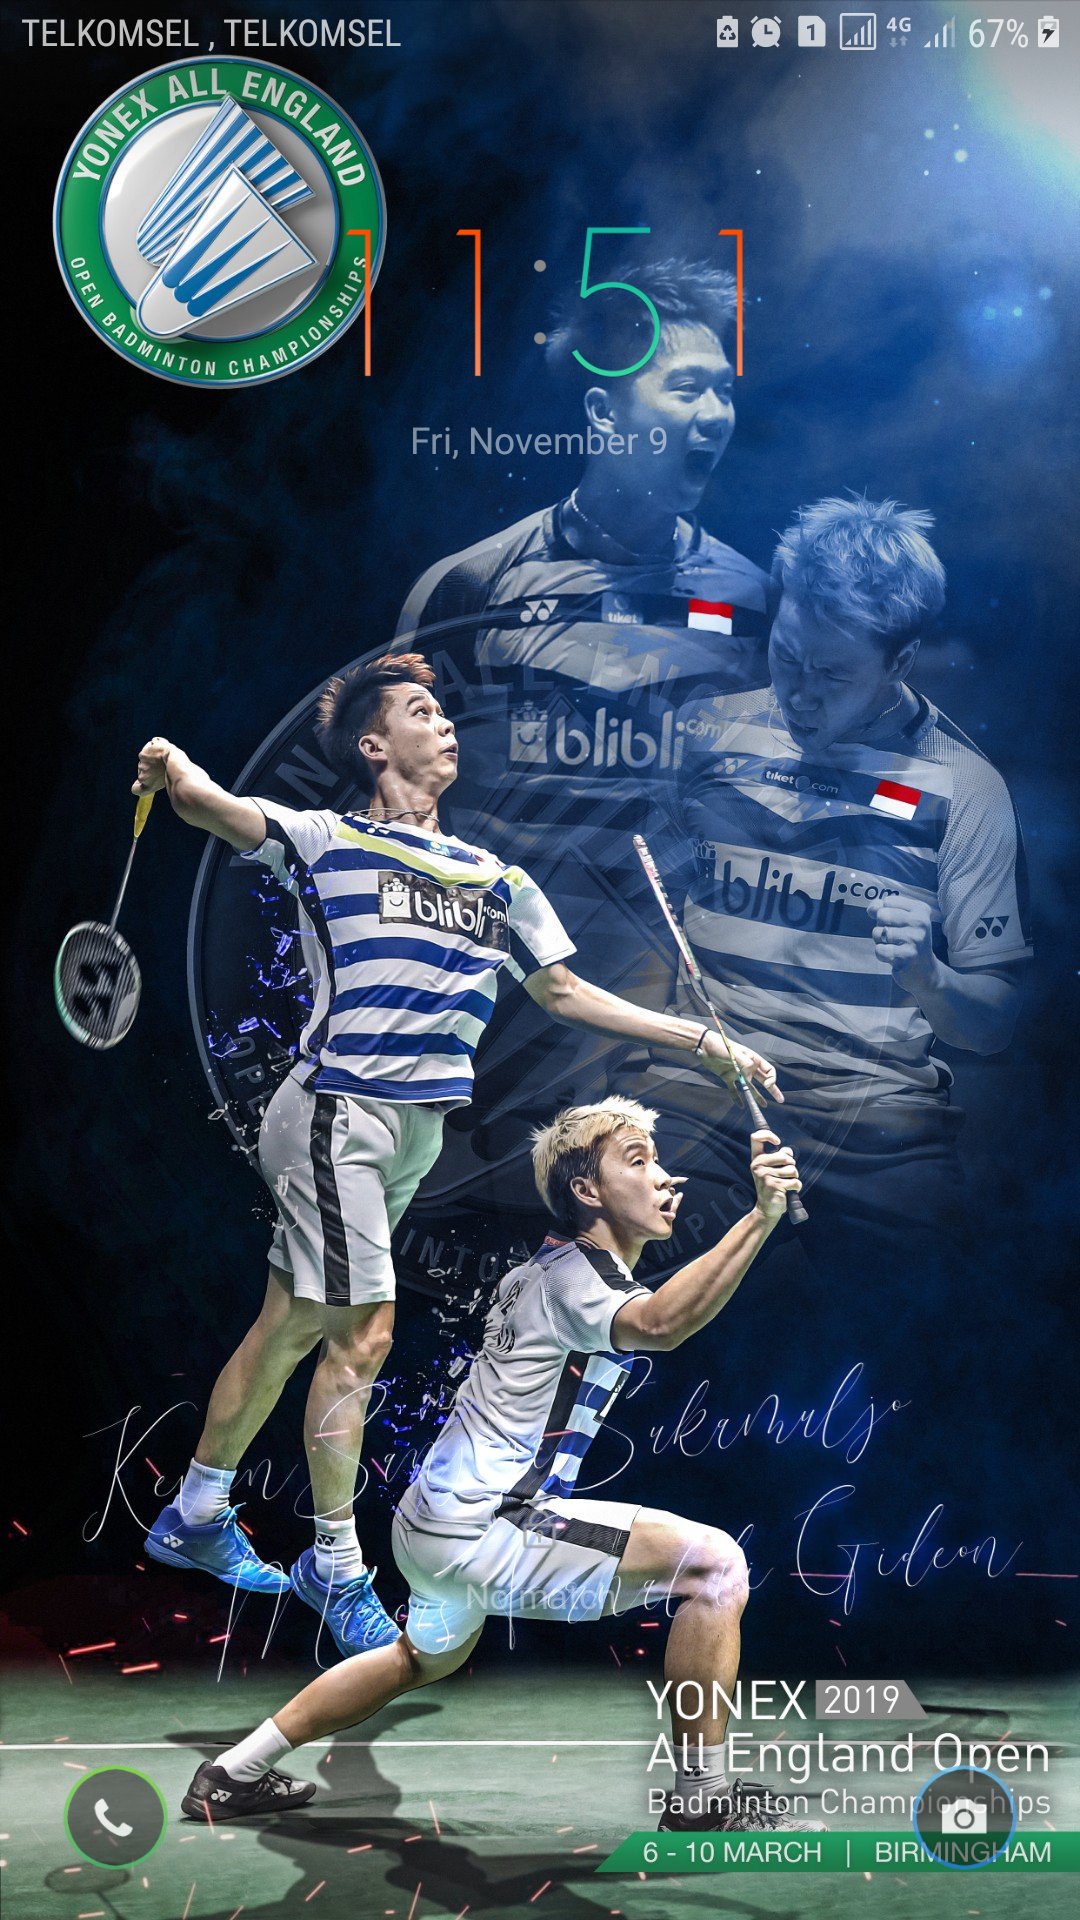 Yonex All England Badminton Championships Proving Extremely Popular Loads Of Players To Choose From Download Your Free Yonex All England Mobile Phone Wallpaper Here With A Free Online